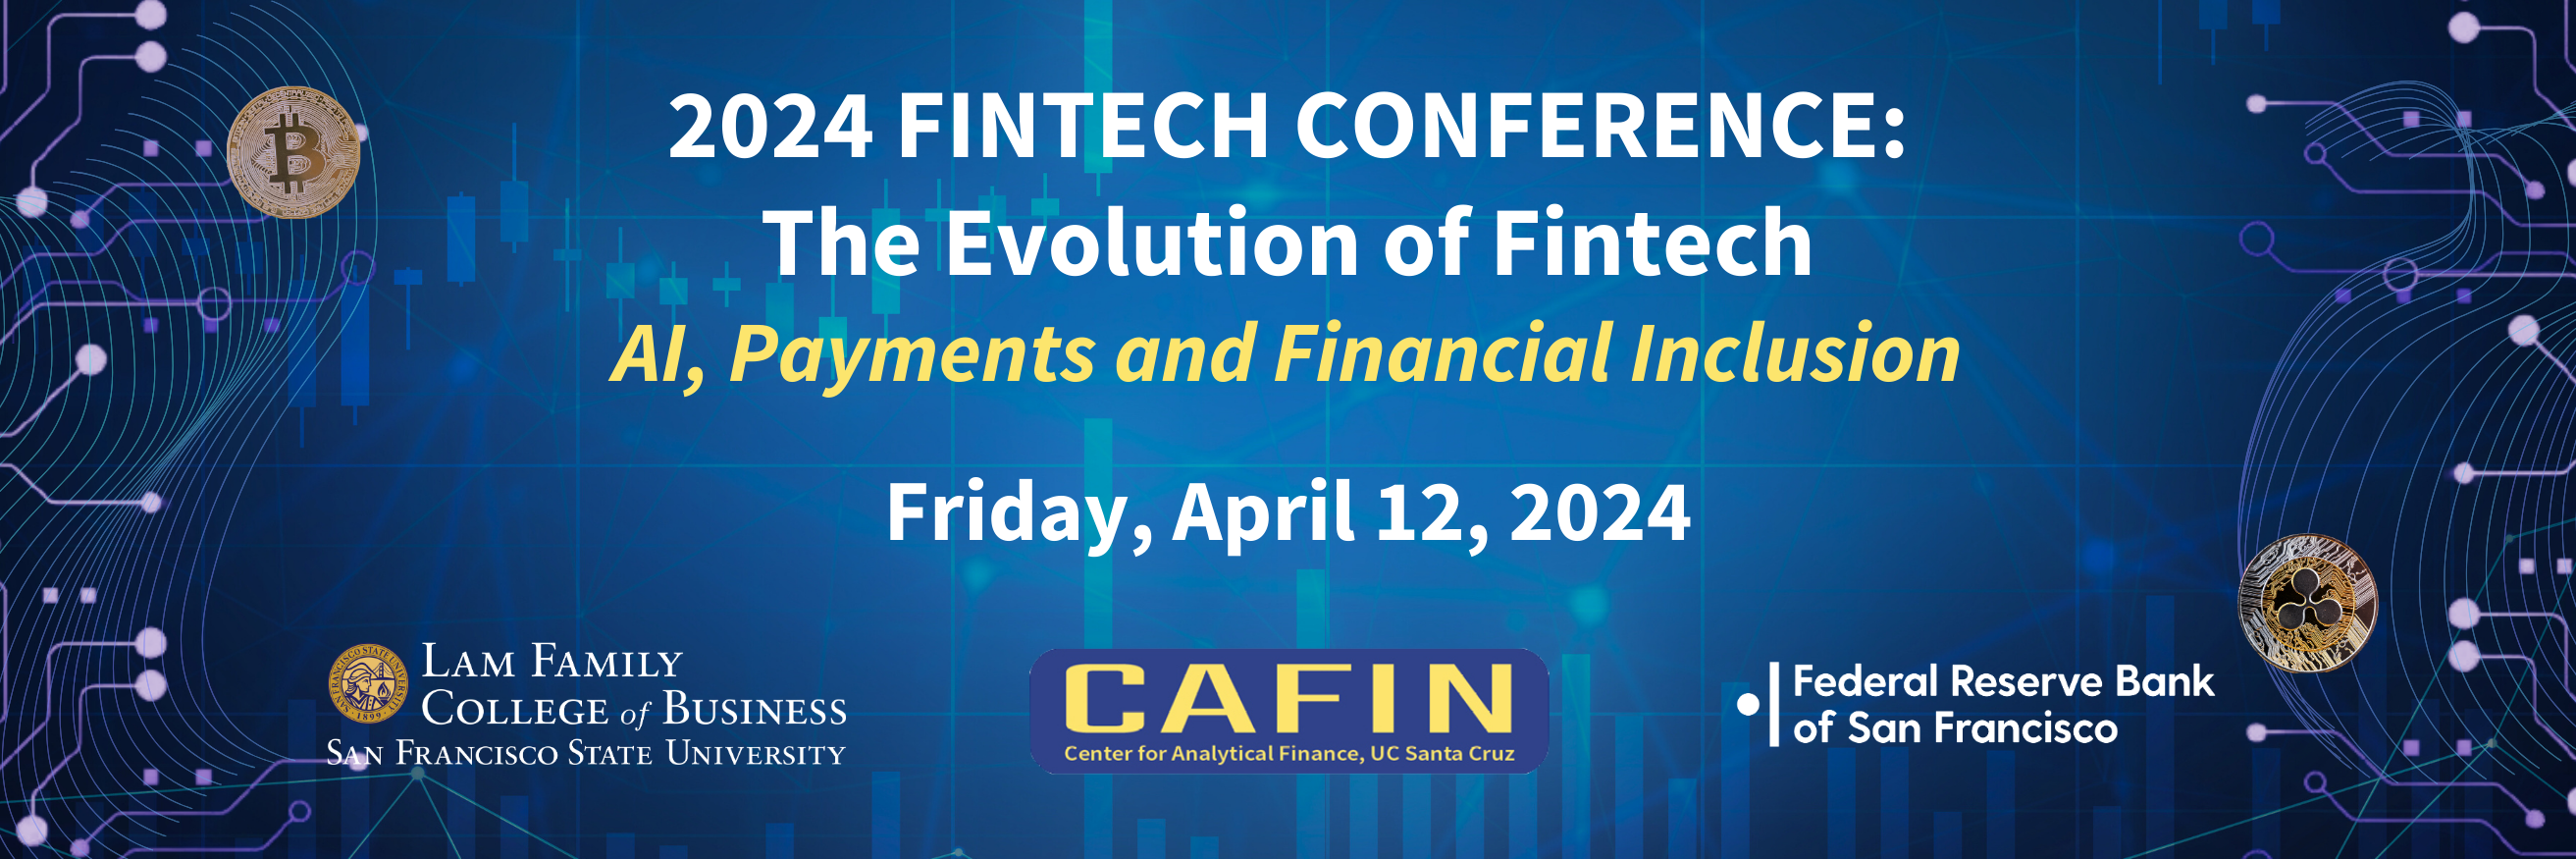 Fintech Conference, the Evolution of Fintech, Friday, April 12, 2024